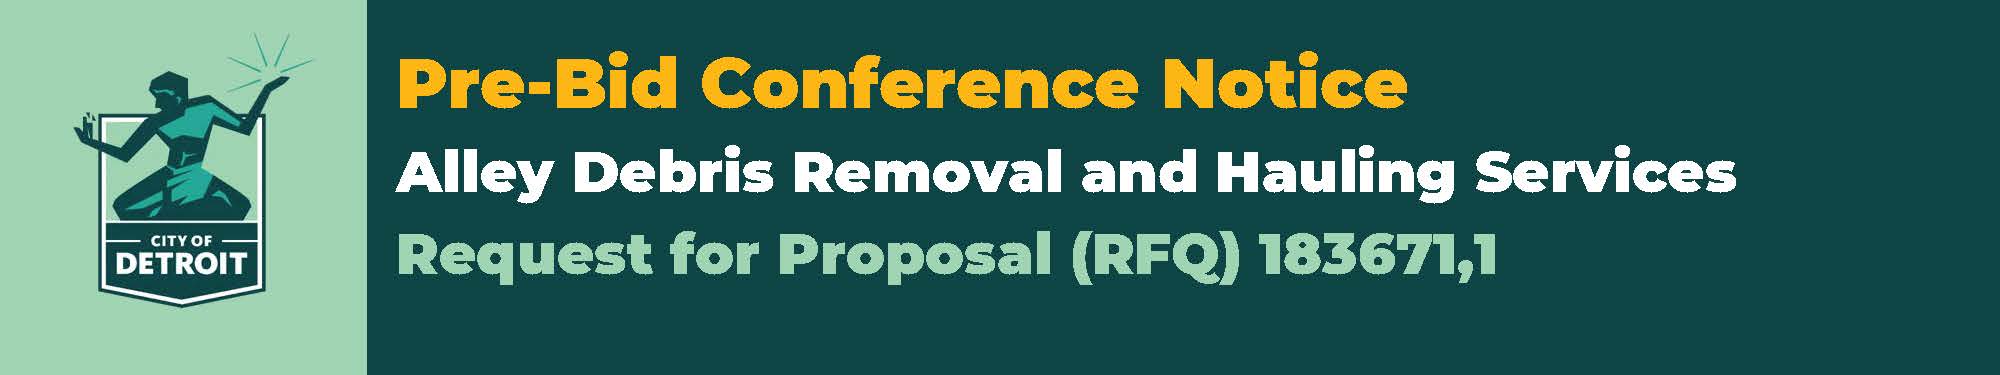 Join Us: Alley Debris Removal and Hauling Services Pre-Bid Conference